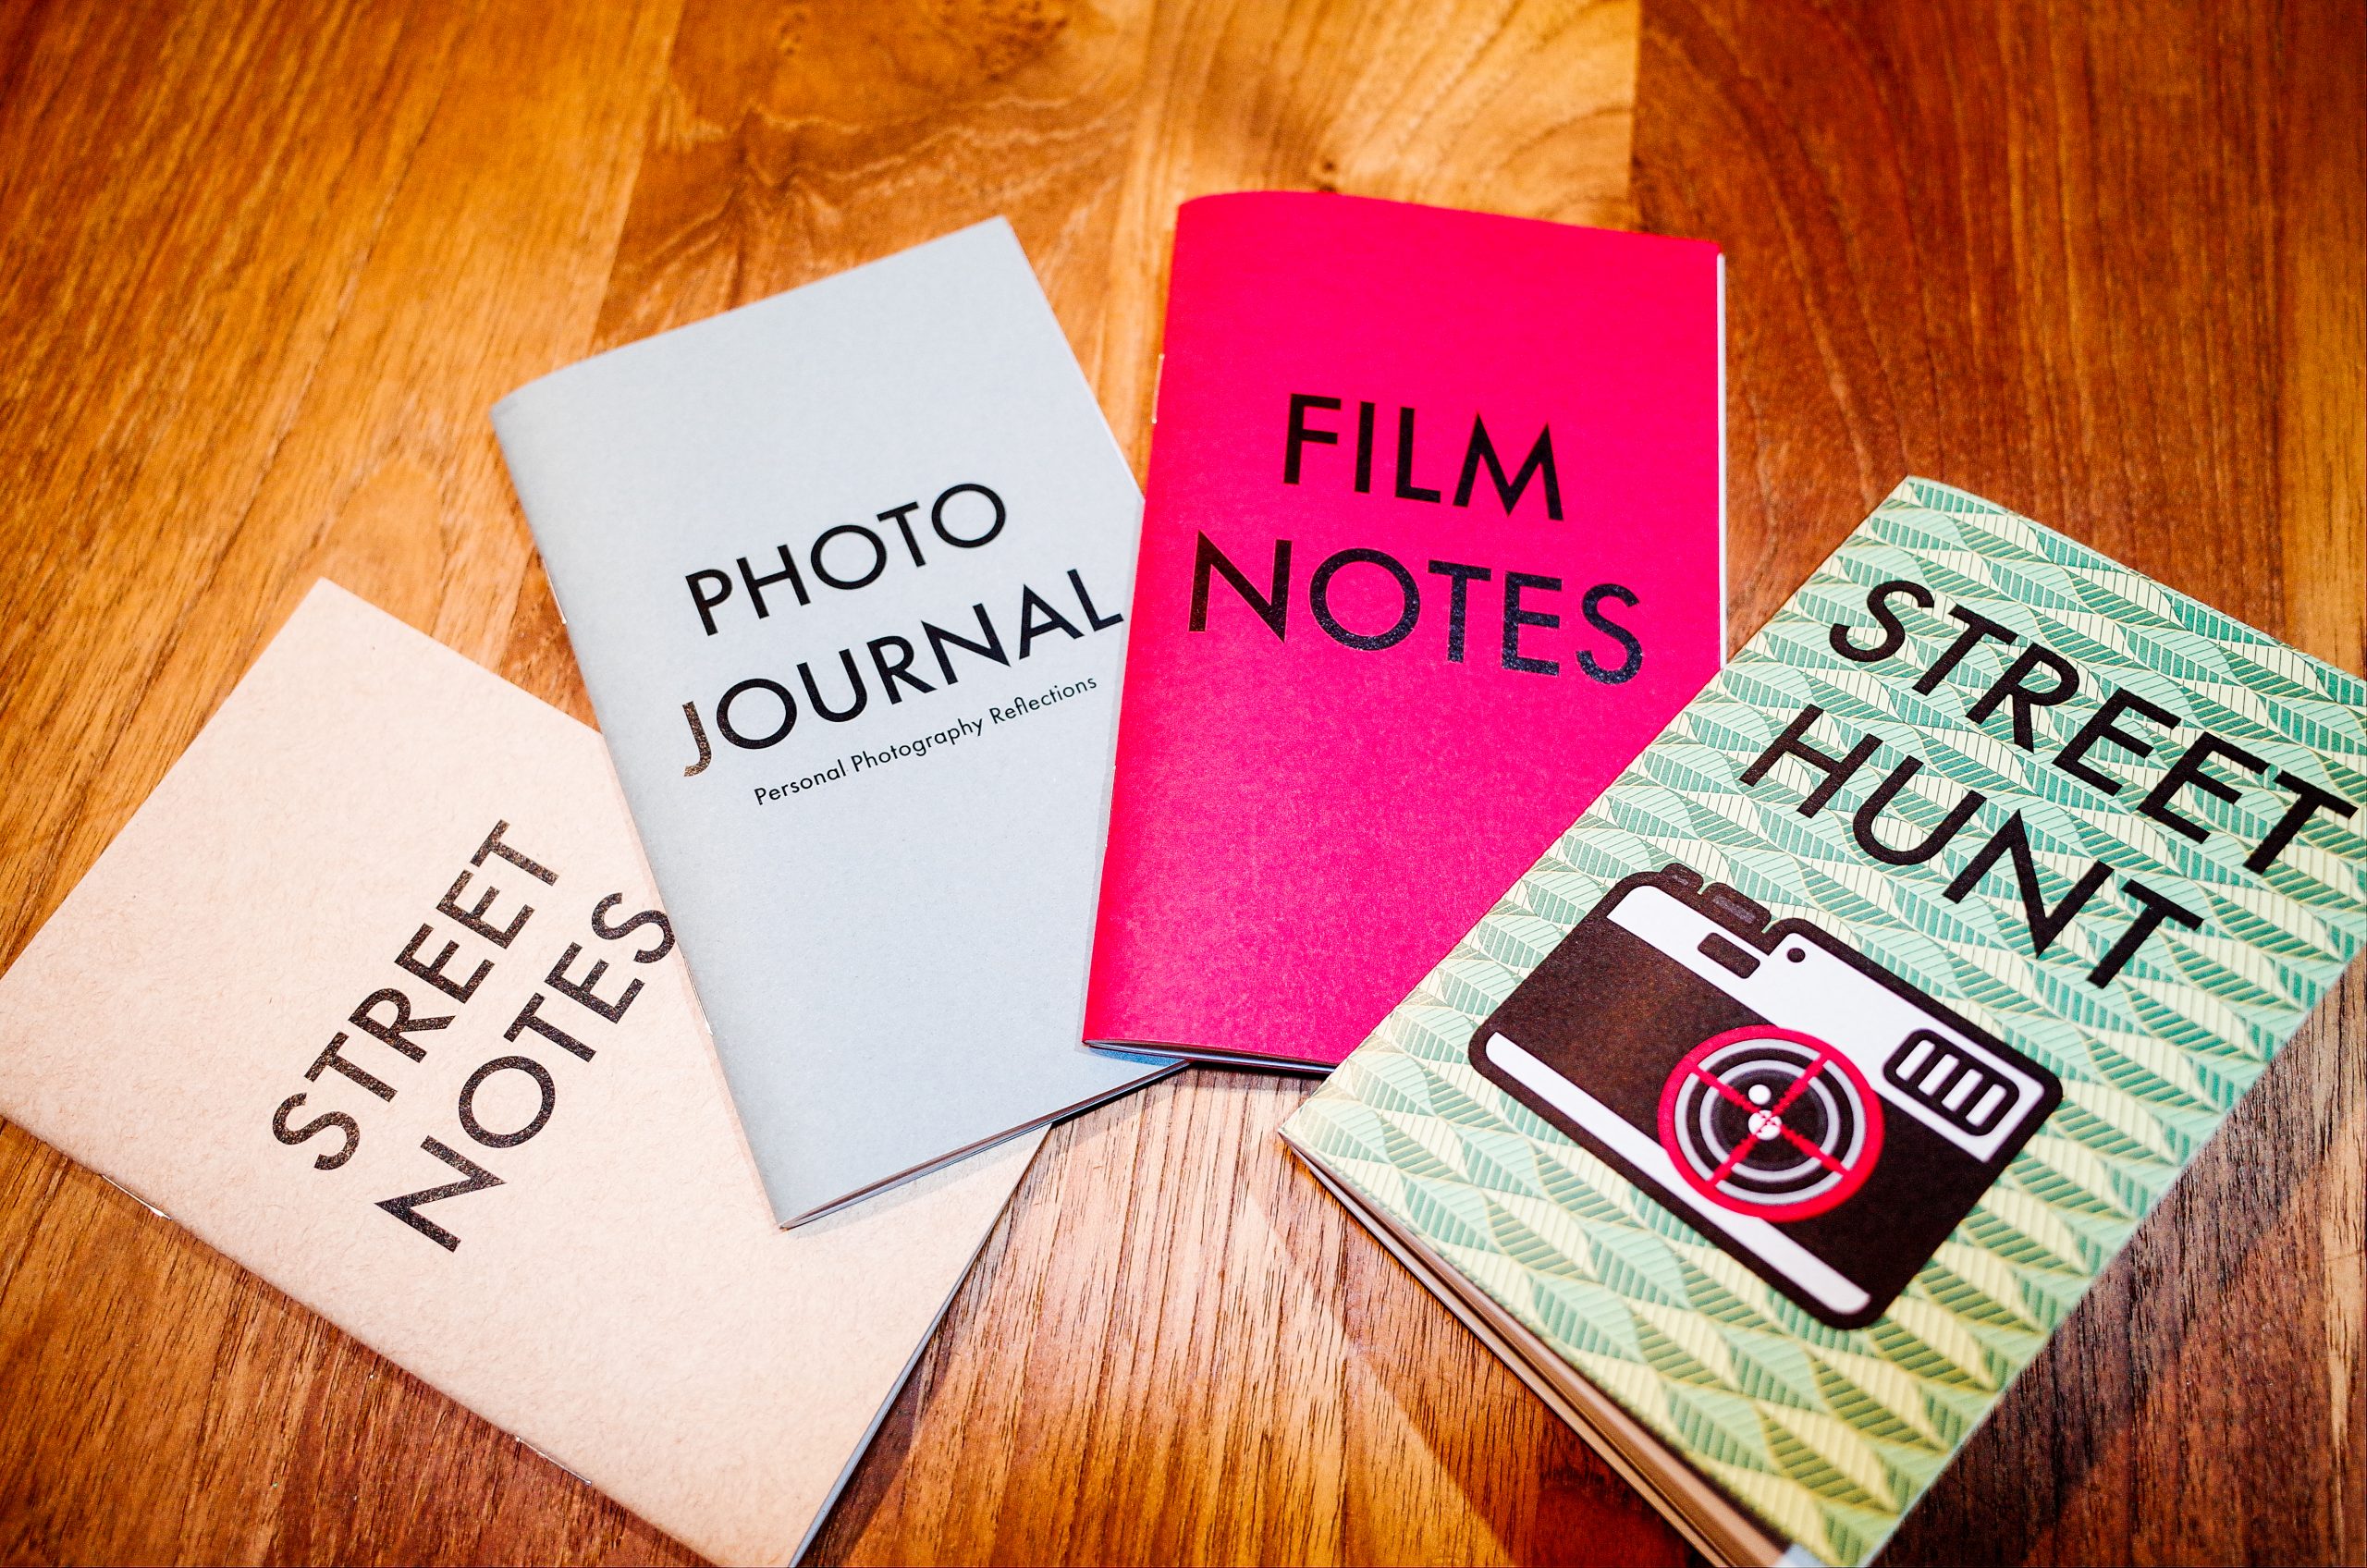 Only for a Limited time HAPTIC PRESS BUNDLE: Street Hunt, Street Notes, Photo Journal, Film Notes + Free Street Notes Mobile & Street Hunt Mobile